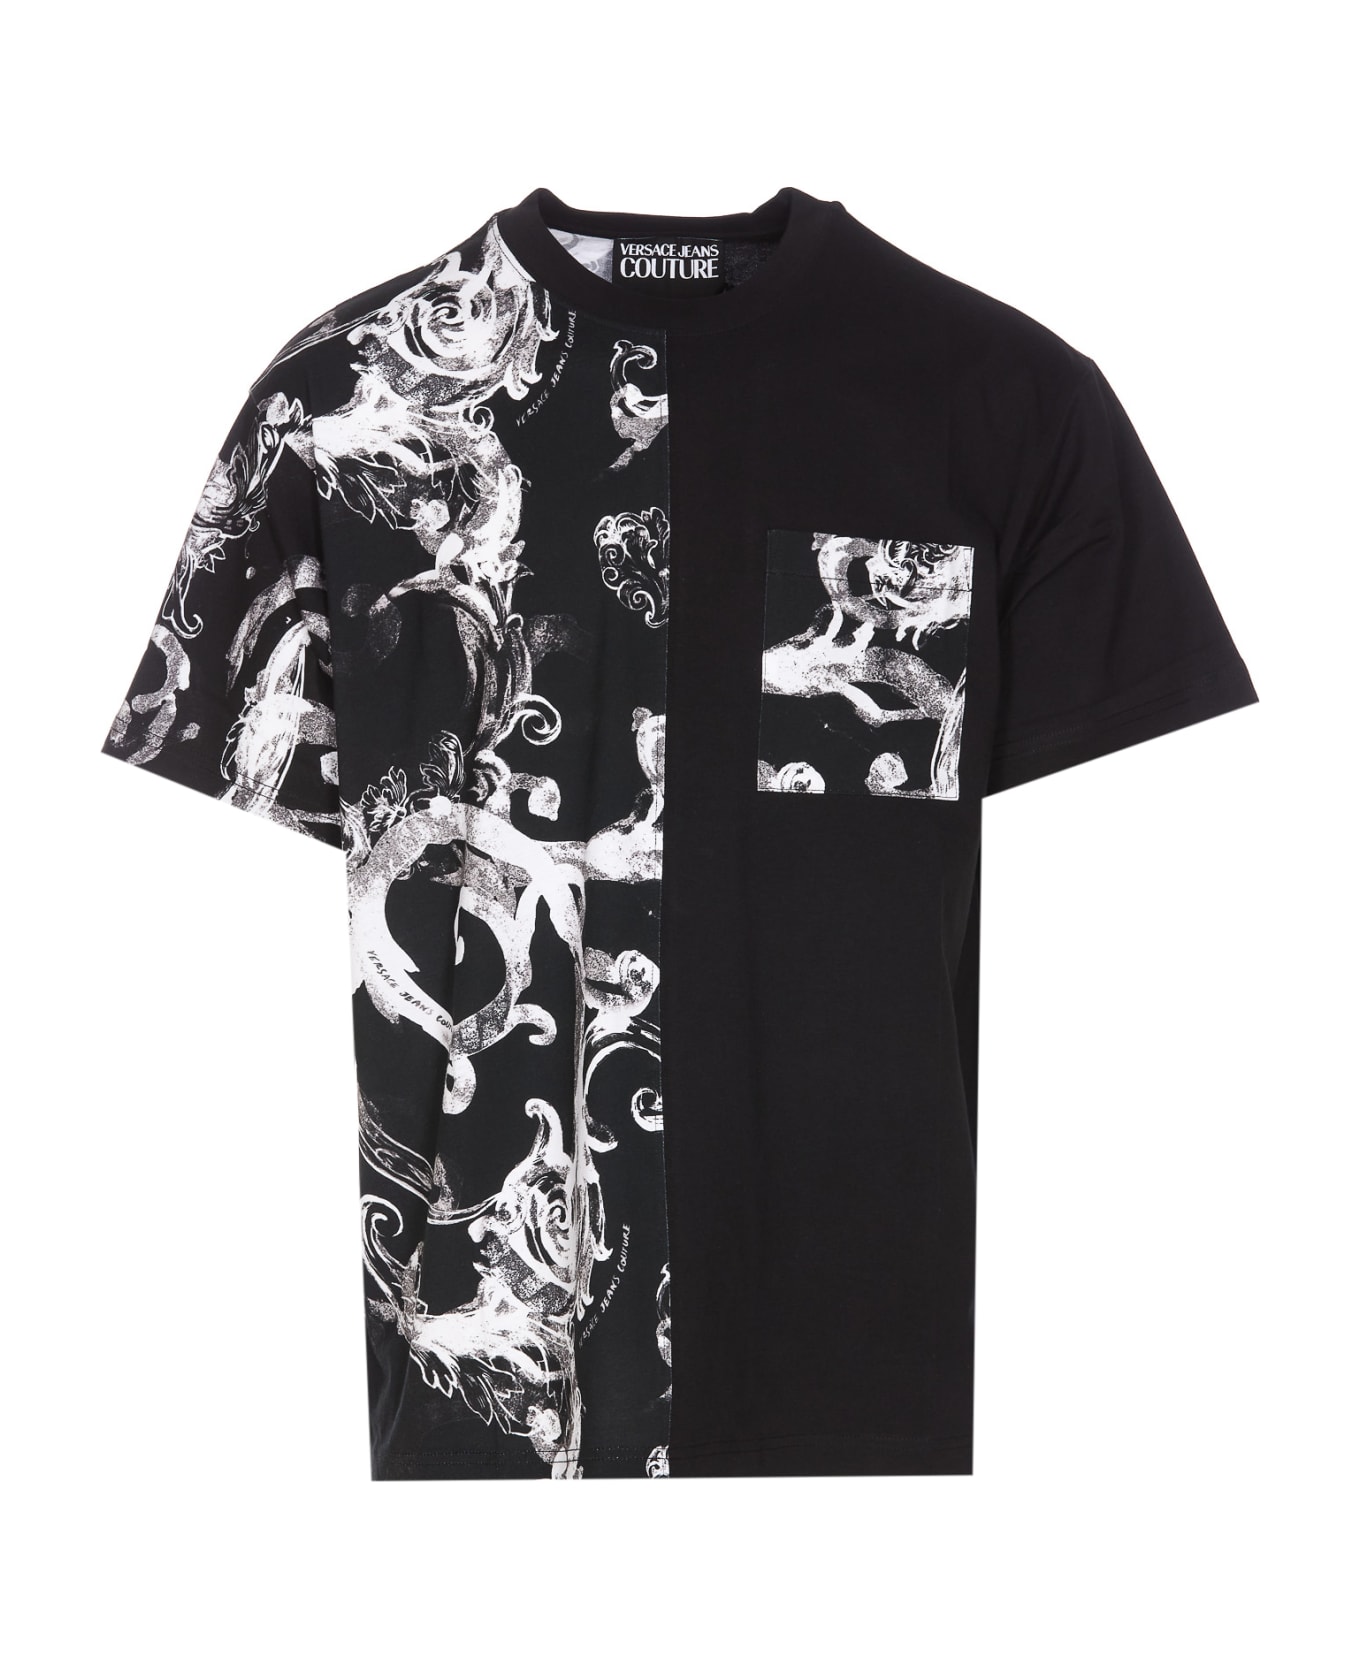 Versace Jeans Couture Printed T-shirt - Black シャツ